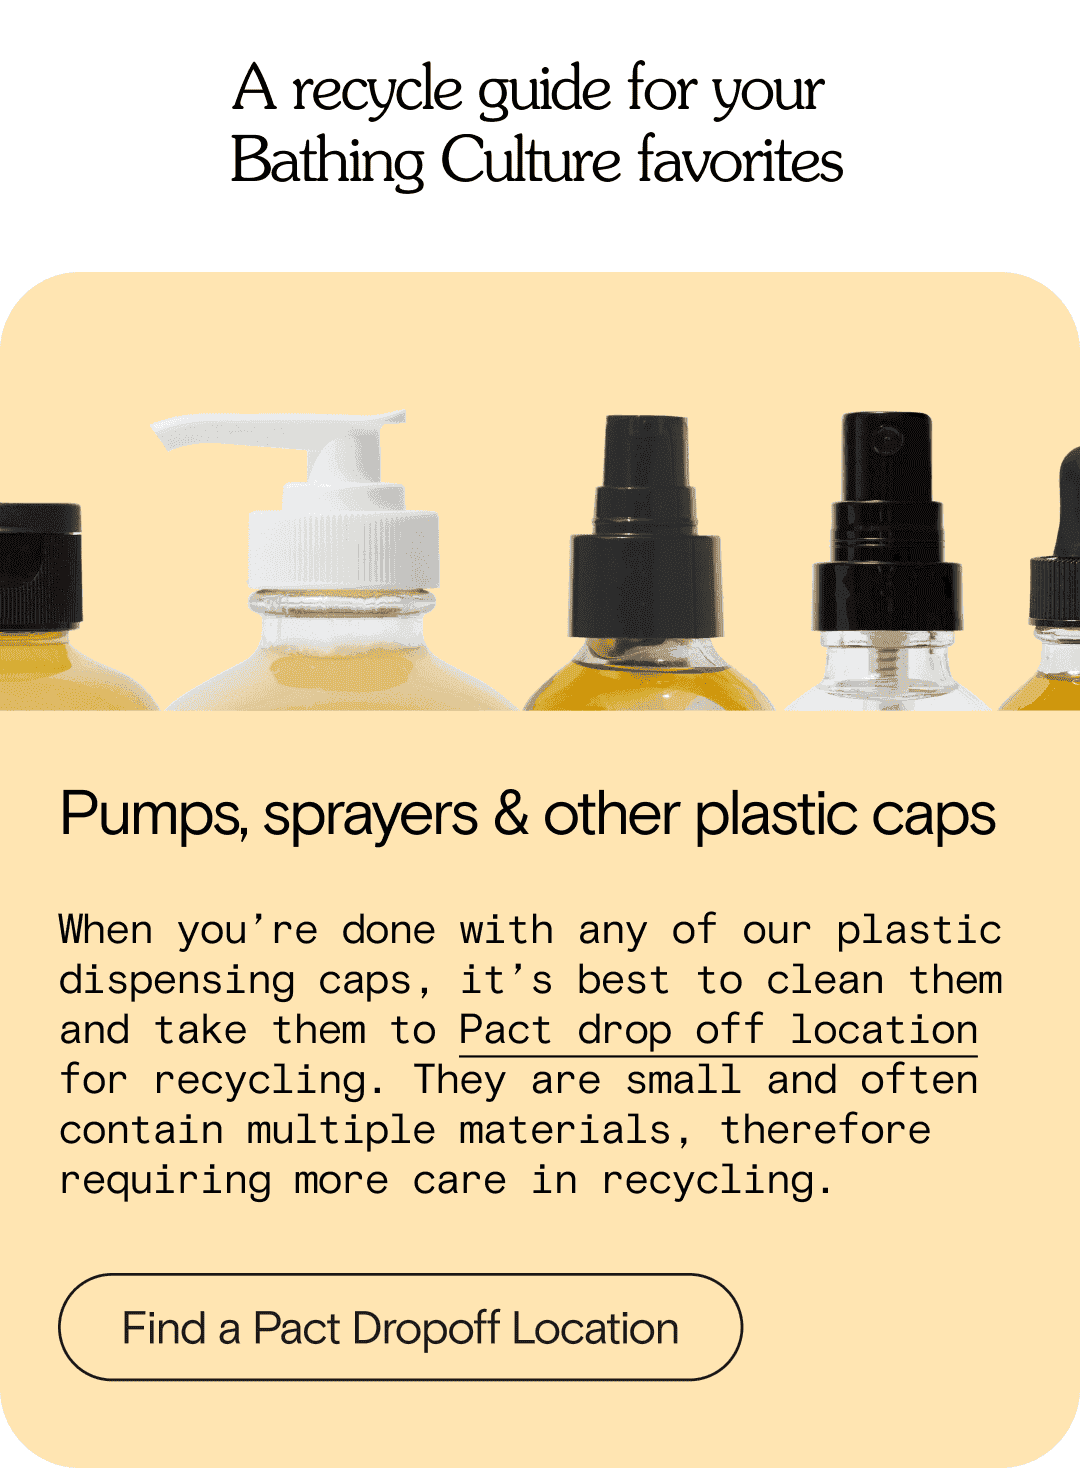 A recycle guide for your  Bathing Culture favorites  Pumps, sprayers & other plastic caps When you’re done with any of our plastic dispensing caps, it’s best to clean them and take them to Pact drop off location for recycling. They are small and often contain multiple materials, therefore requiring more care in recycling. Find a Pact Dropoff Location